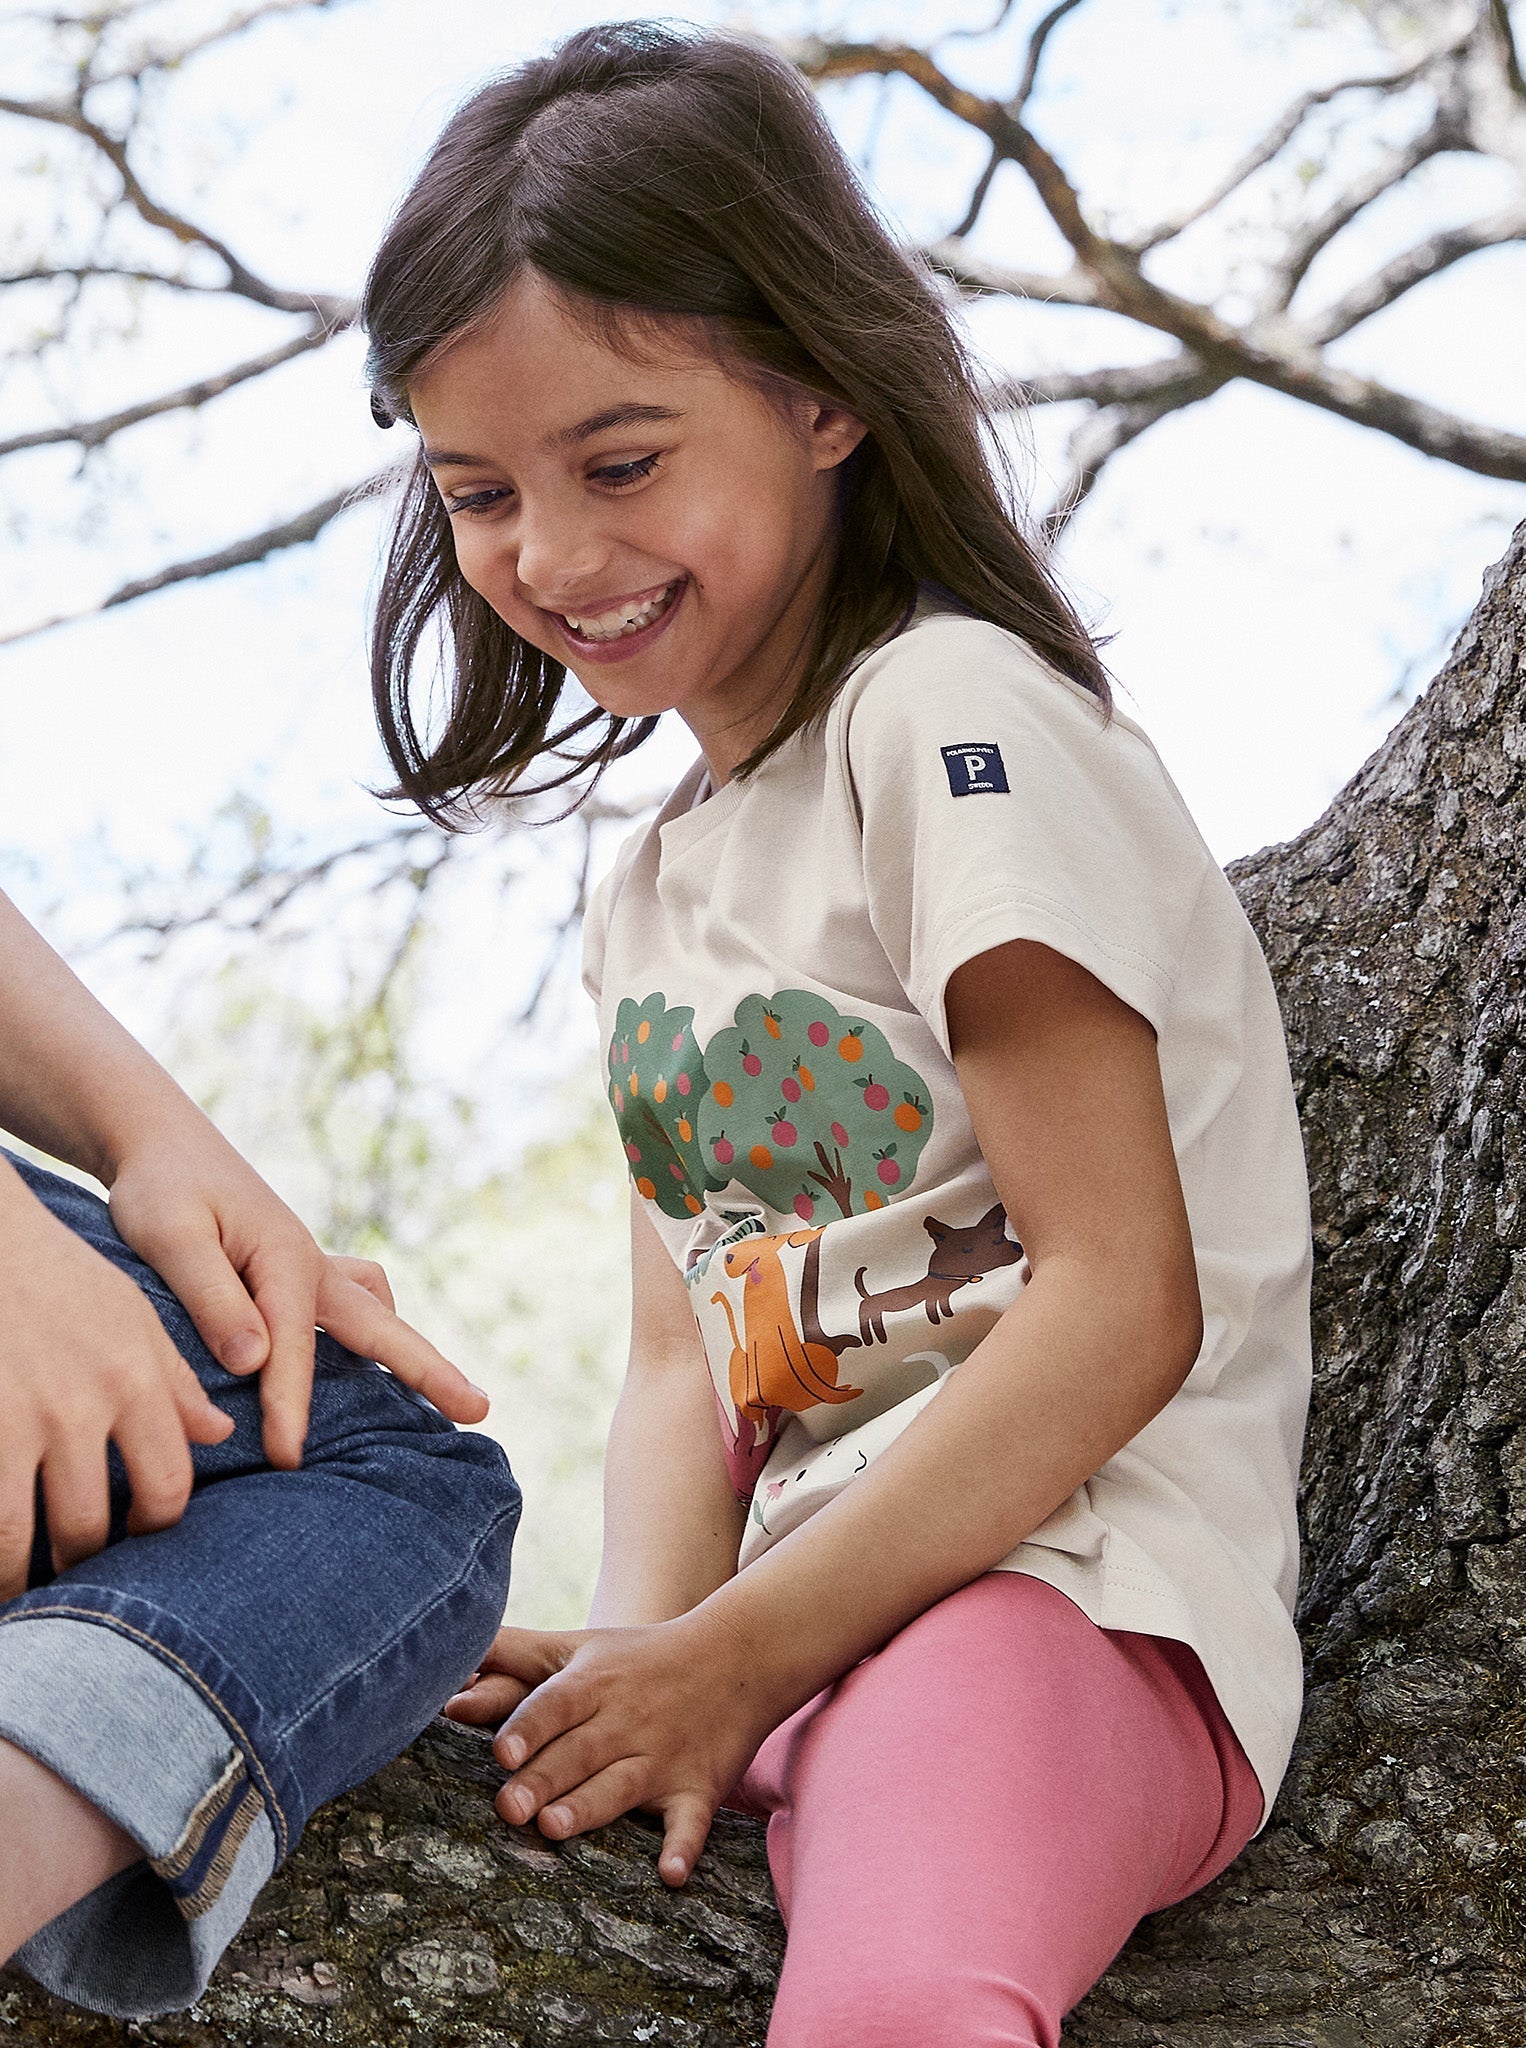 Organic Cotton Animal Print T-Shirt from the Polarn O. Pyret Kidswear collection. The best ethical kids clothes